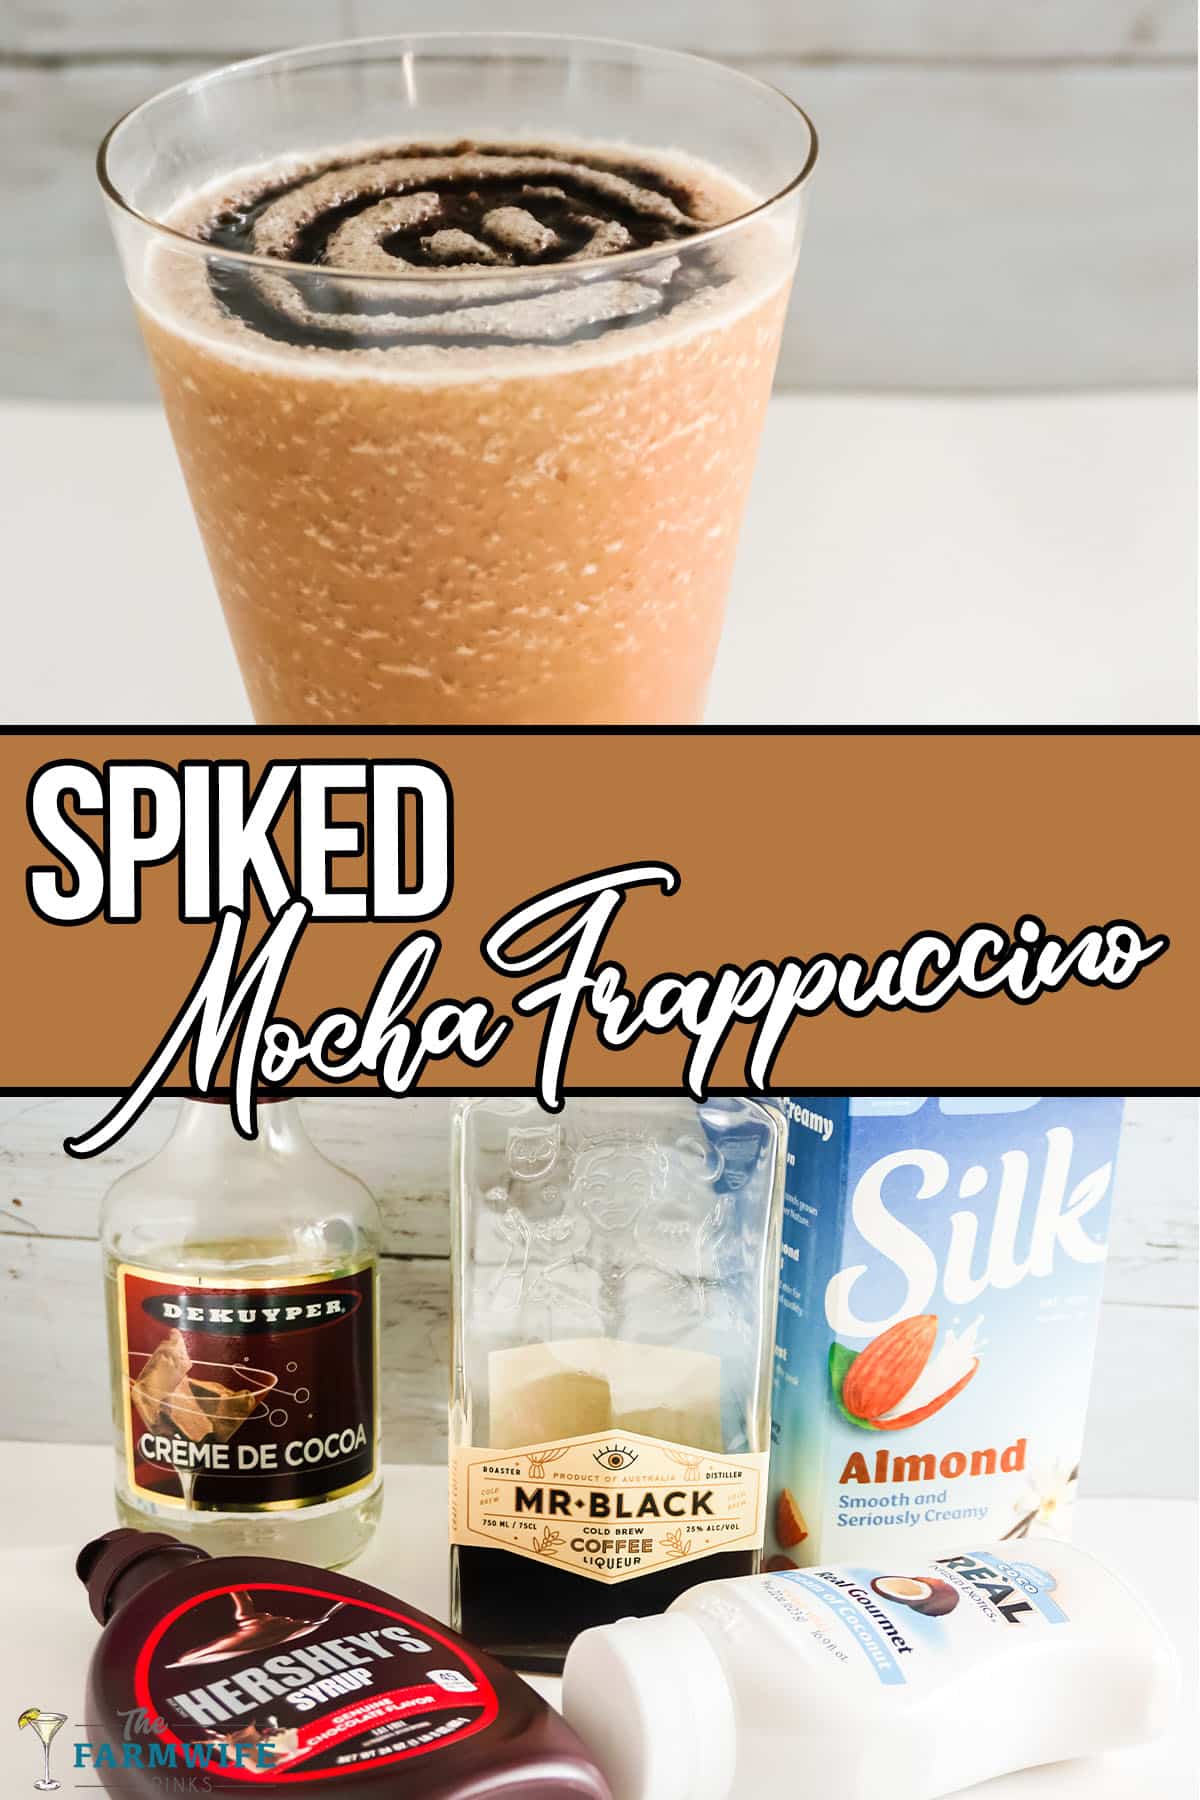 Finished Spiked Mocha Frappuccino, and ingredients with wording in middle.